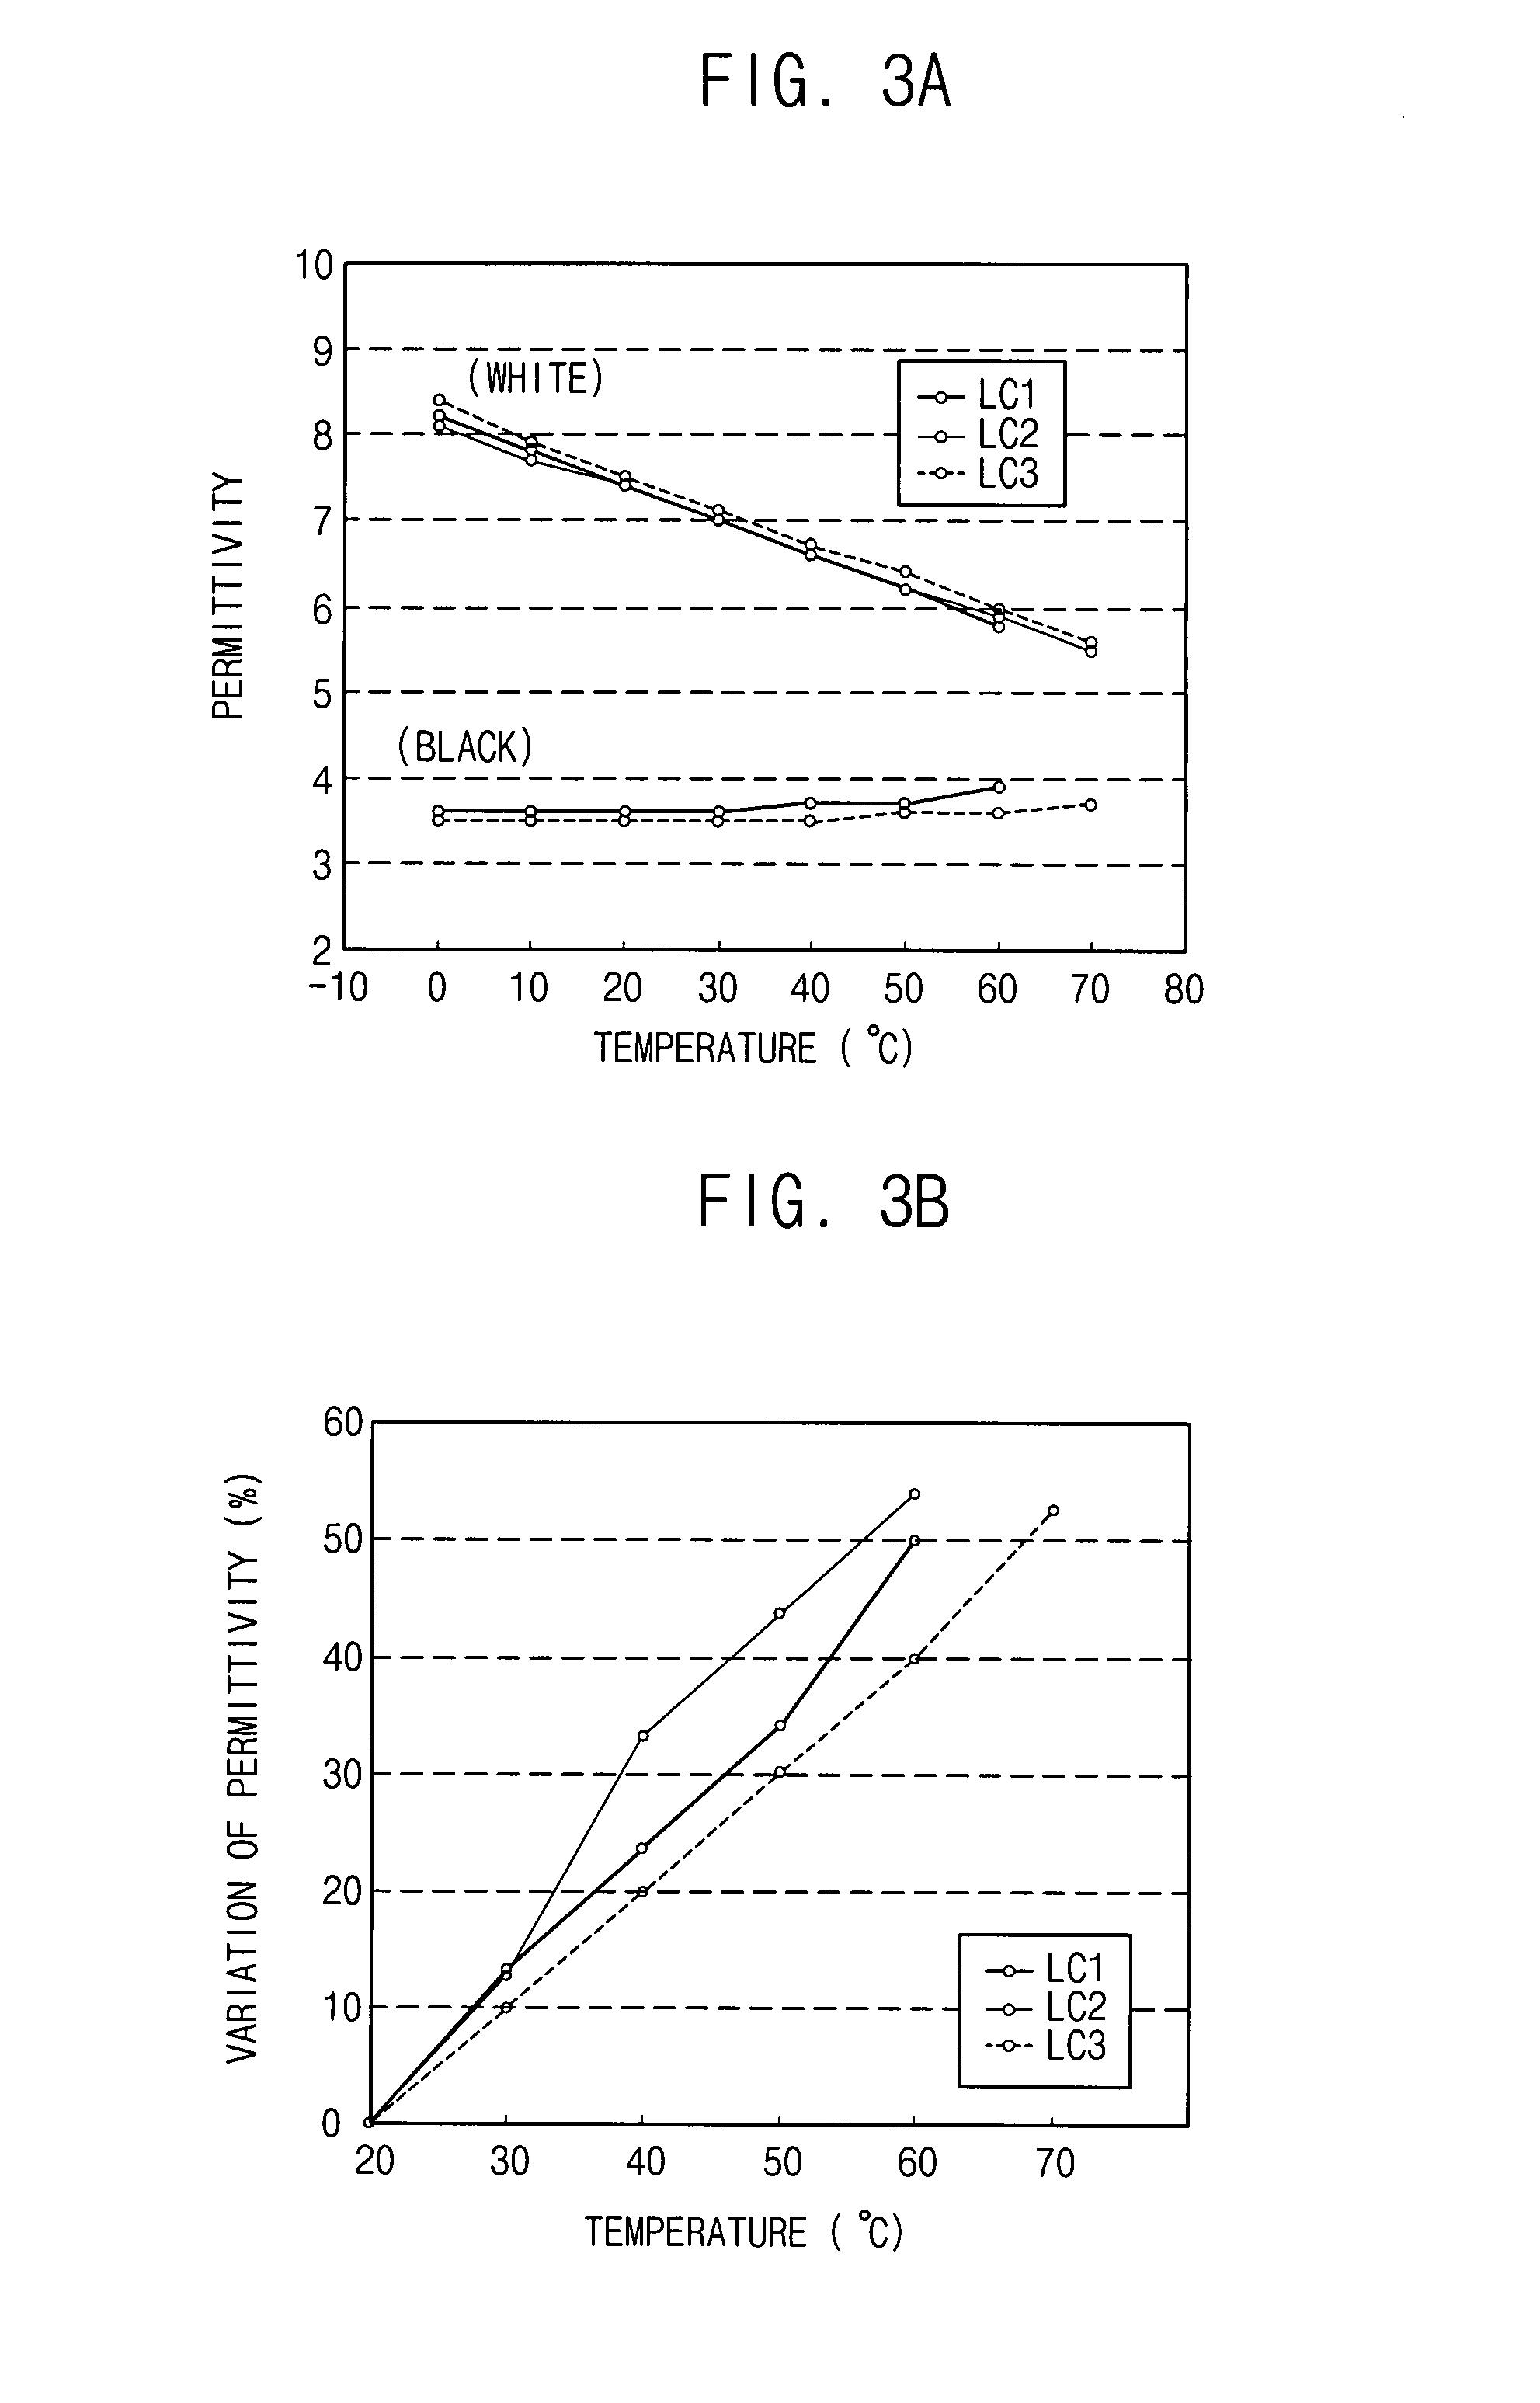 Gamma-reference-voltage generating circuit and apparatus for generating gamma-voltages and display device having the circuit